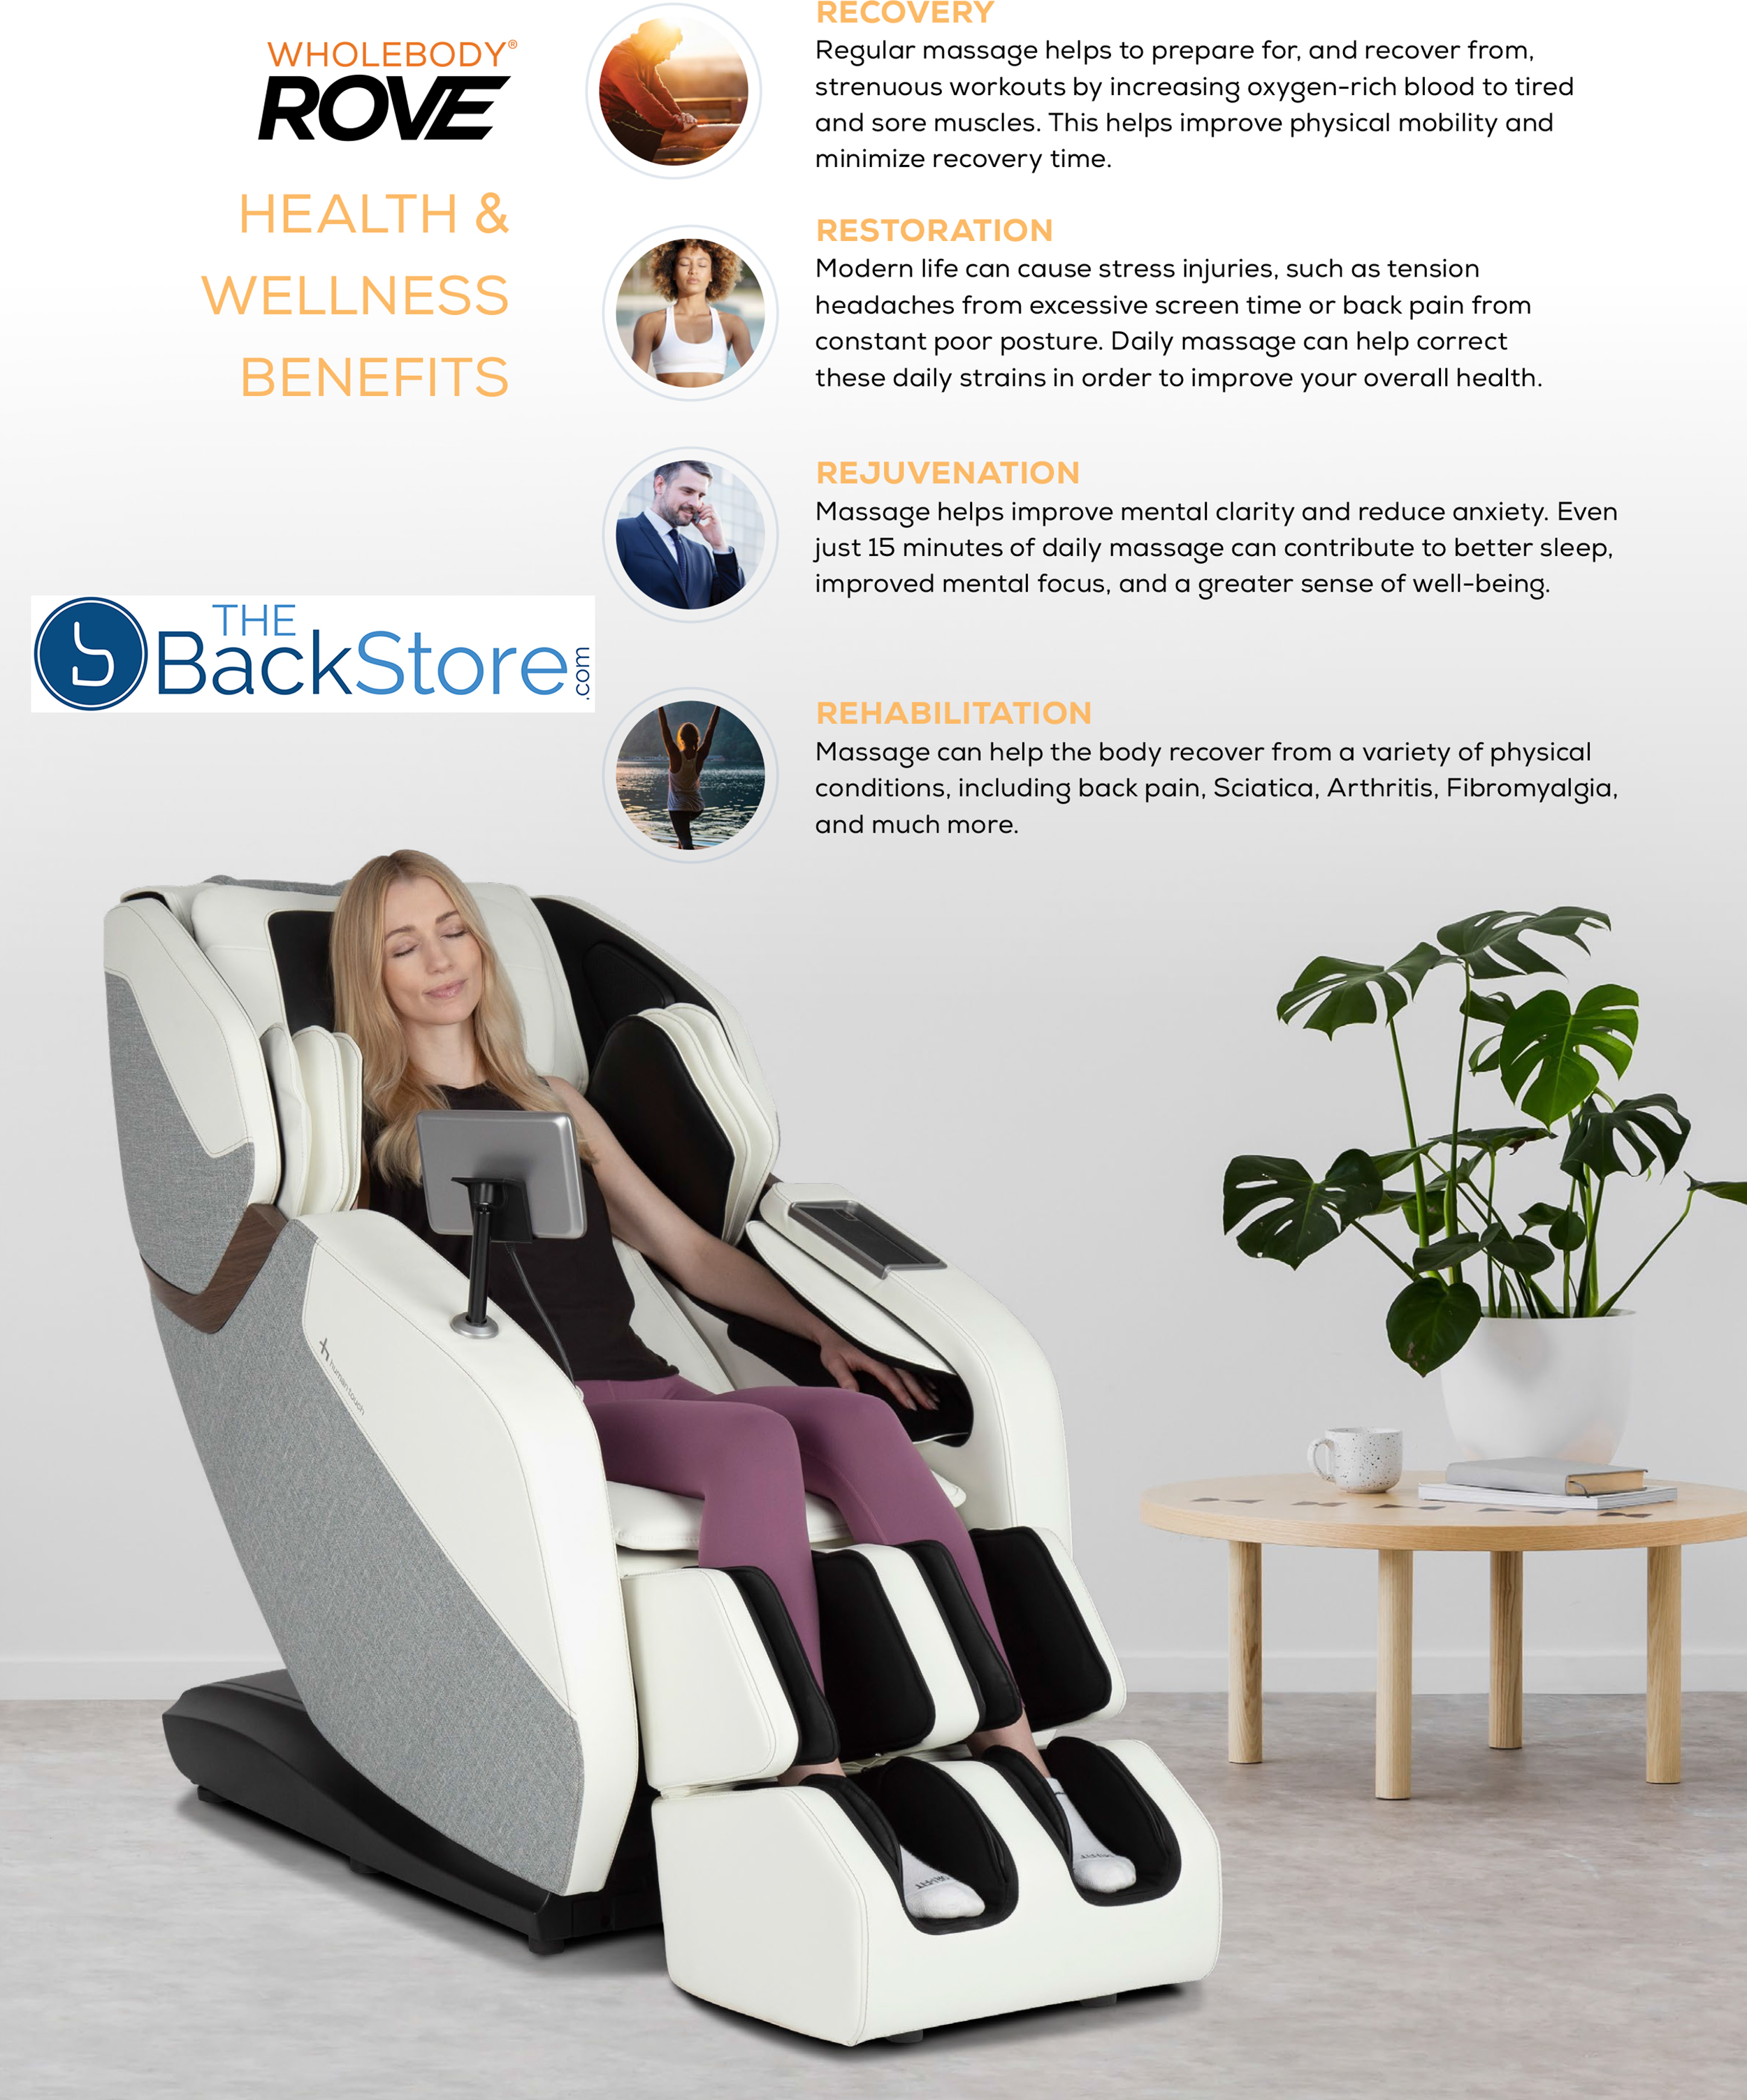 https://vitalityweb.com/backstore/HumanTouch/pics/Human_Touch_WholeBody_ROVE_Massage_Chair_Feature_List.jpg